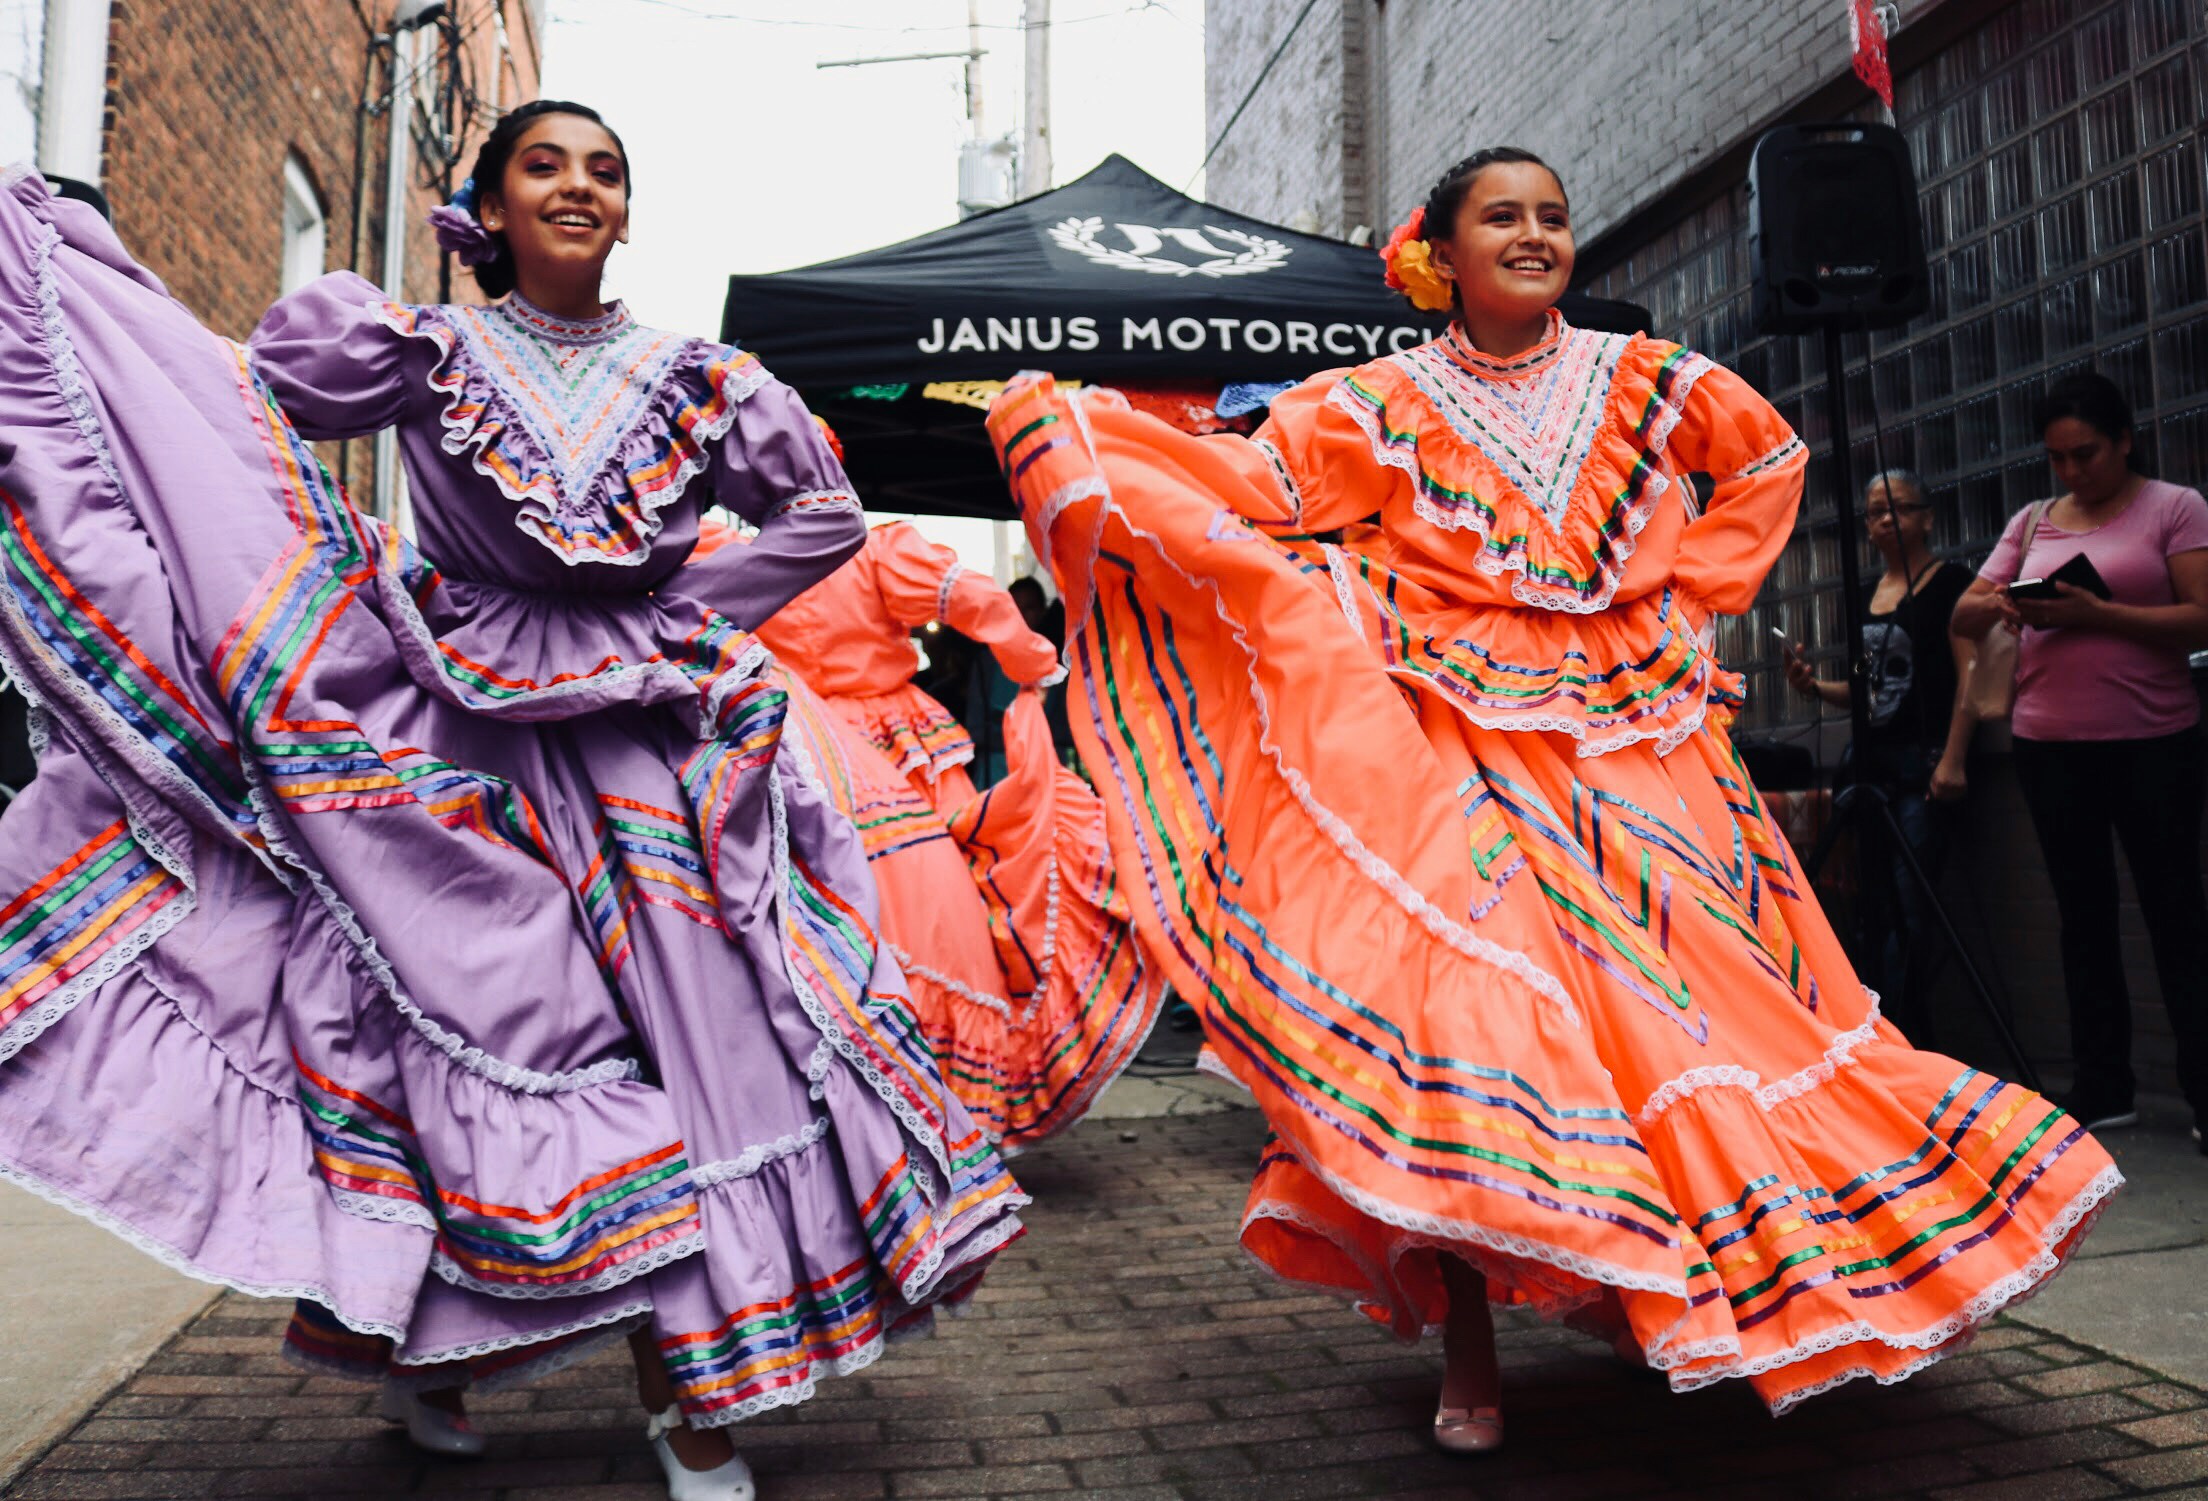 two women in colorful dresses dancing on the street